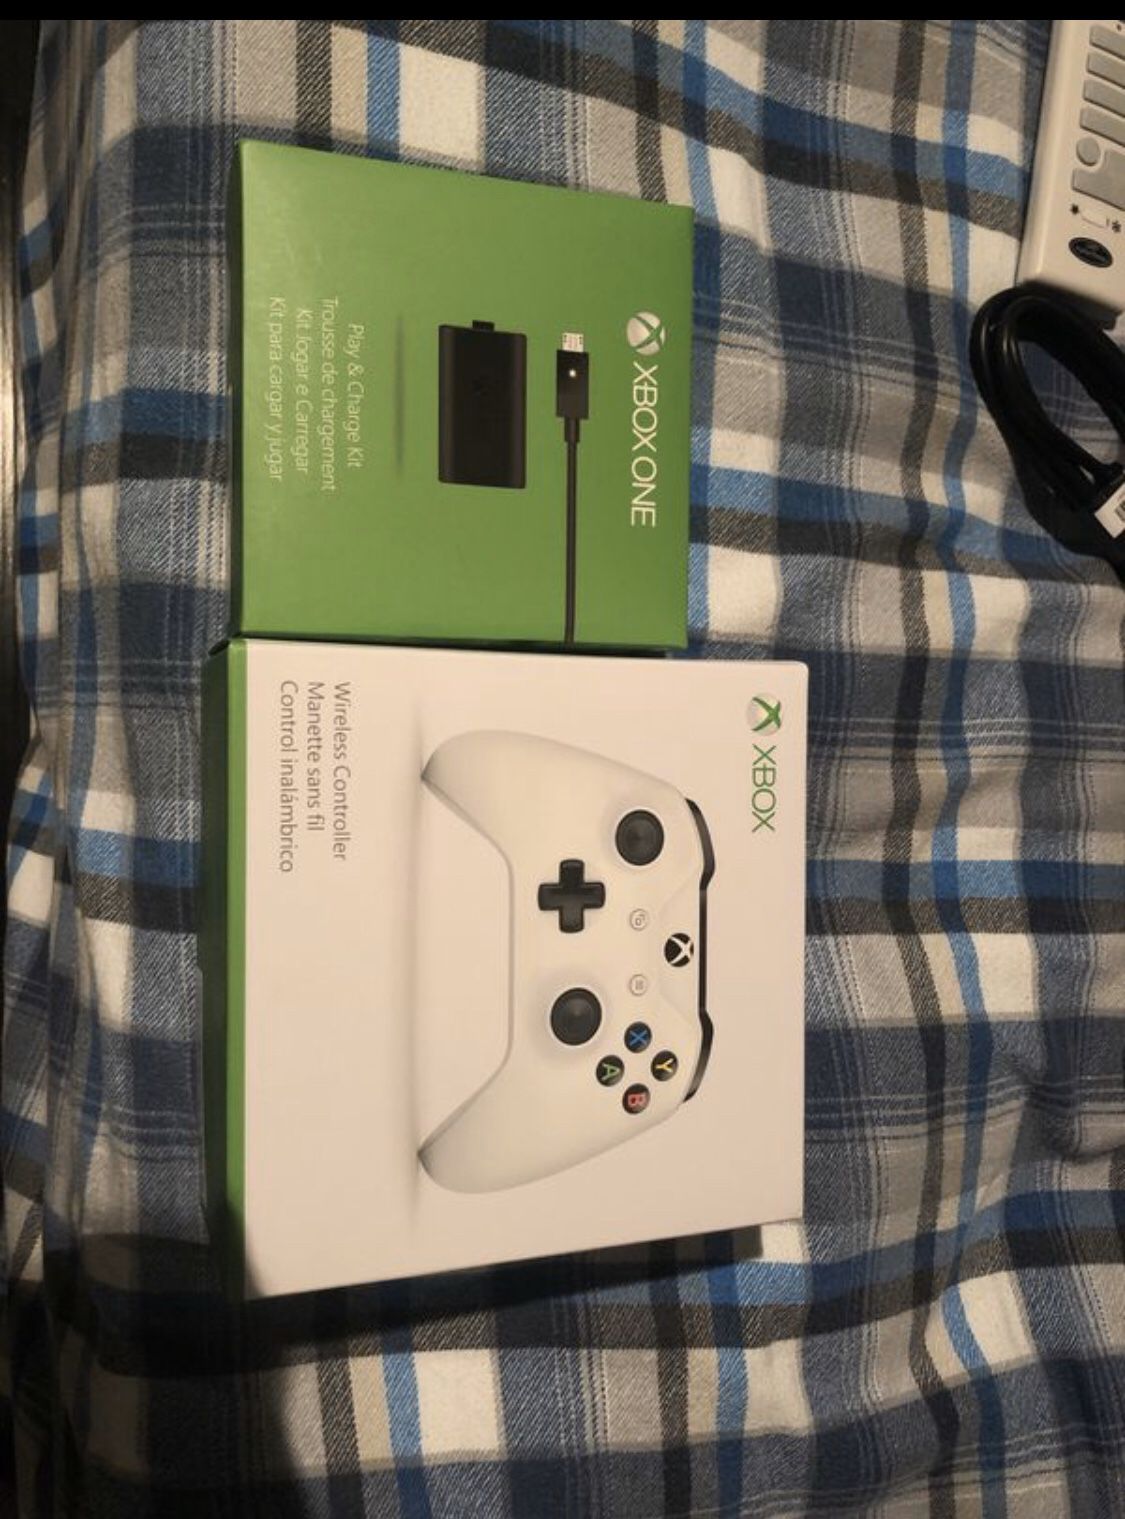 Xbox wireless controller and play and charge kit